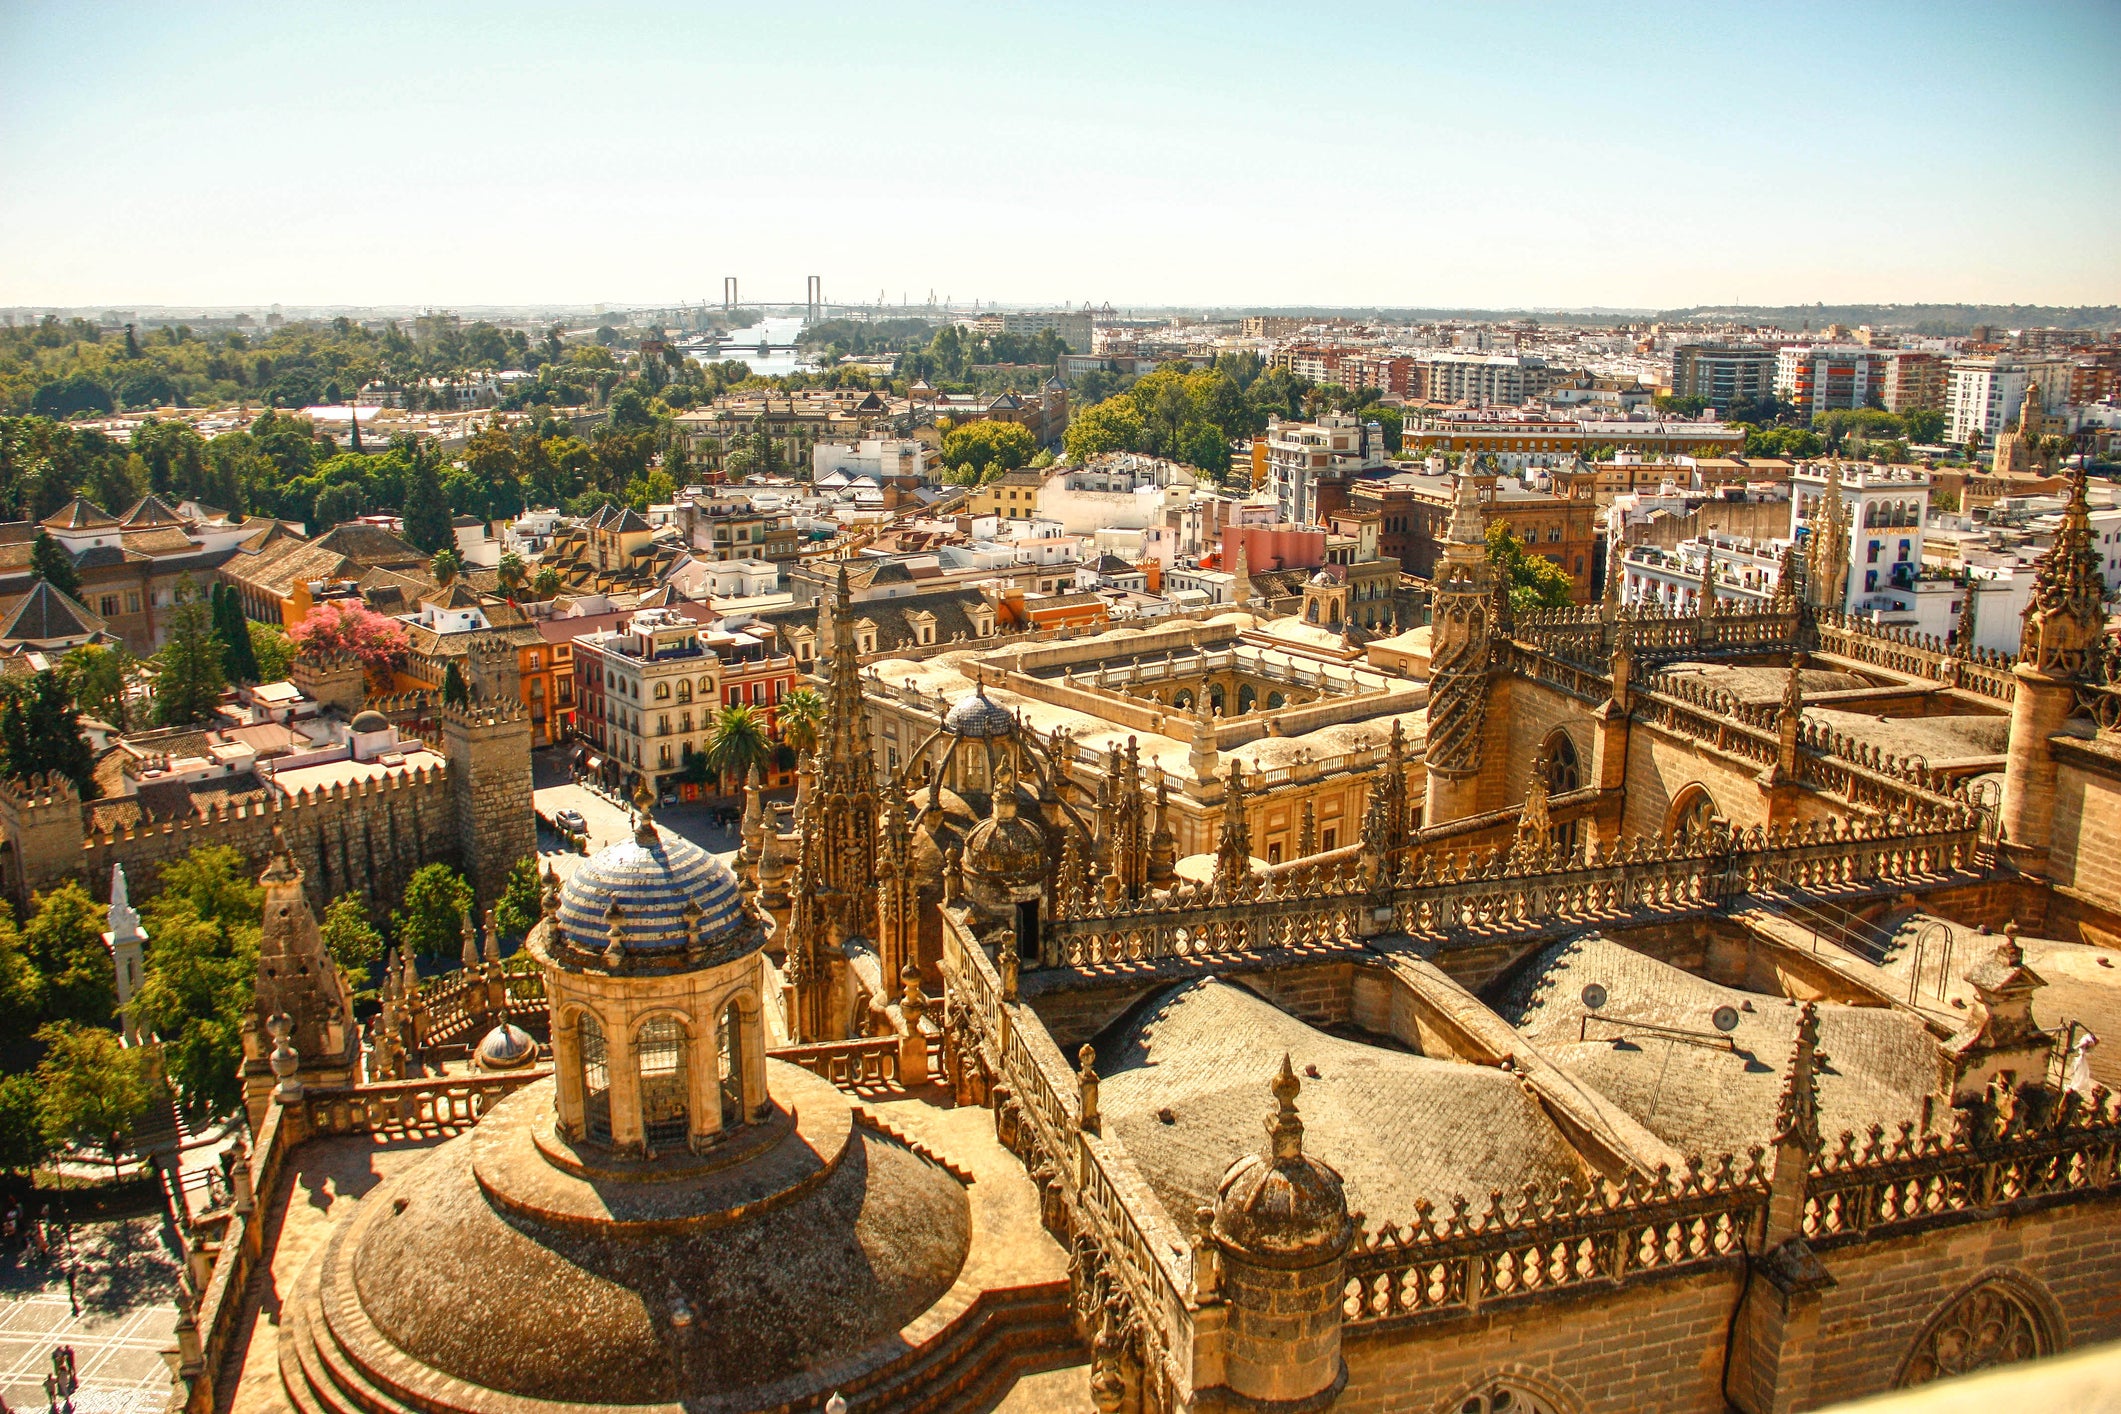 In September, Seville’s temperatures are warm but pleasant